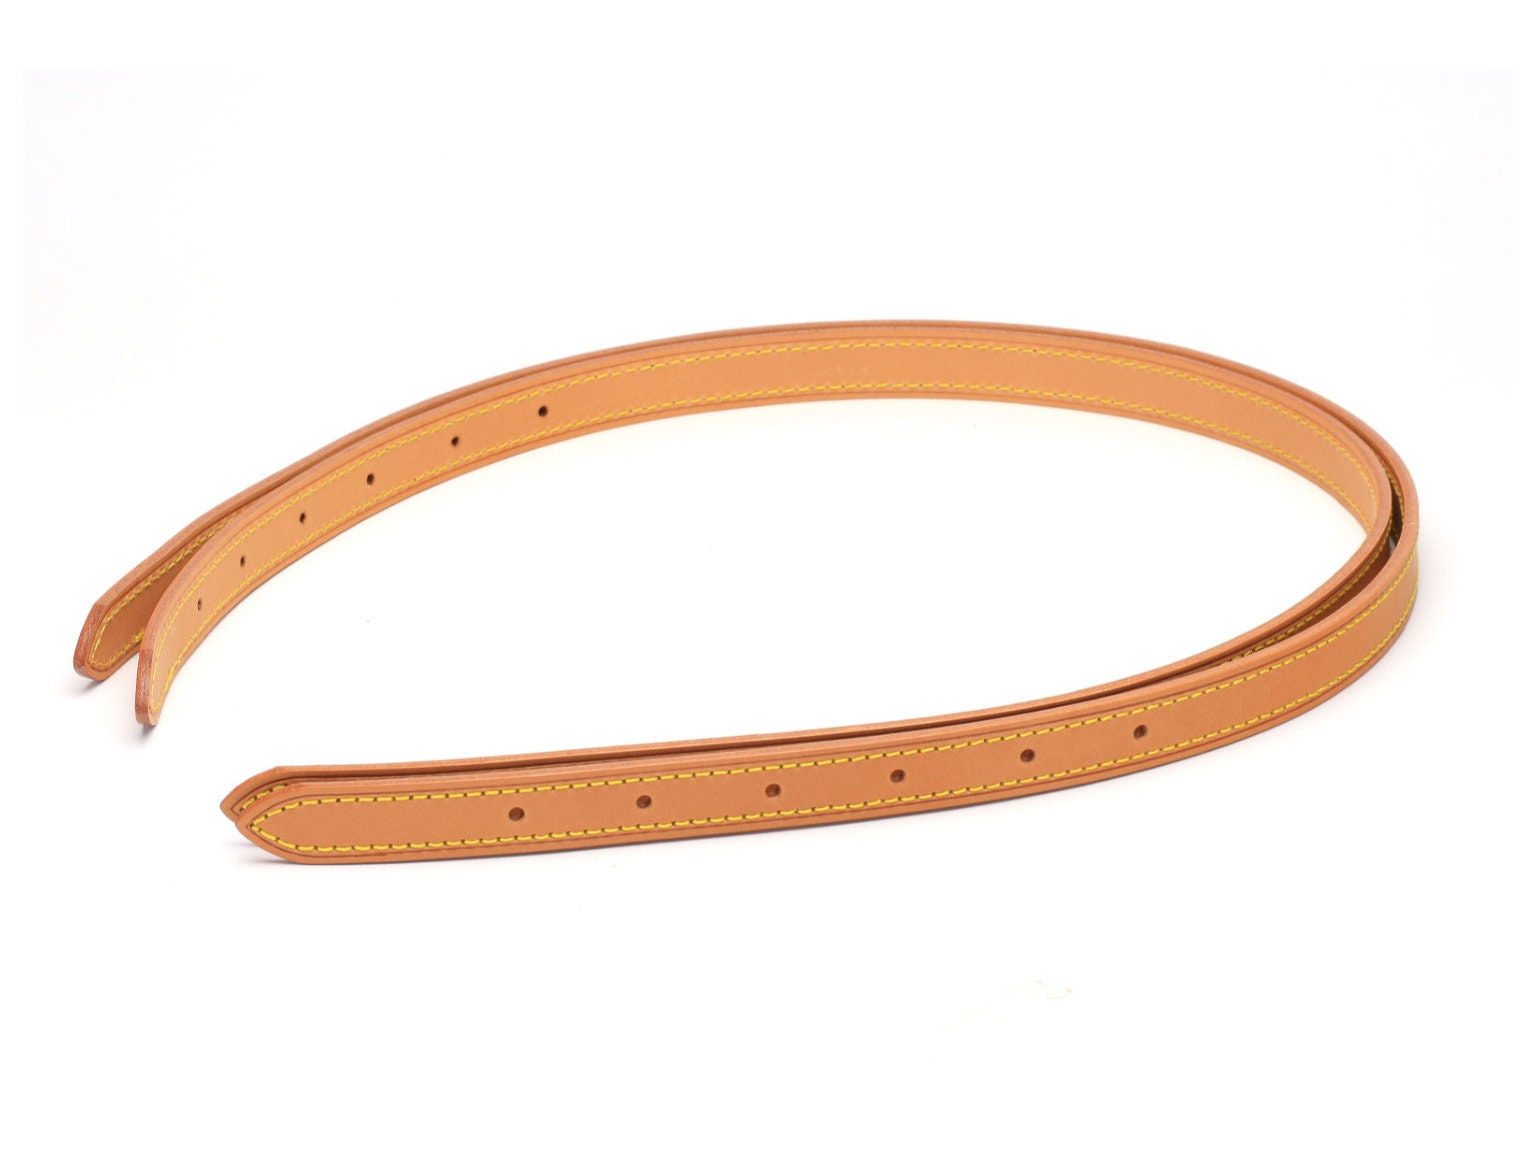 Pair of Vachetta Leather Replacement Straps for Bucket PM / GM 